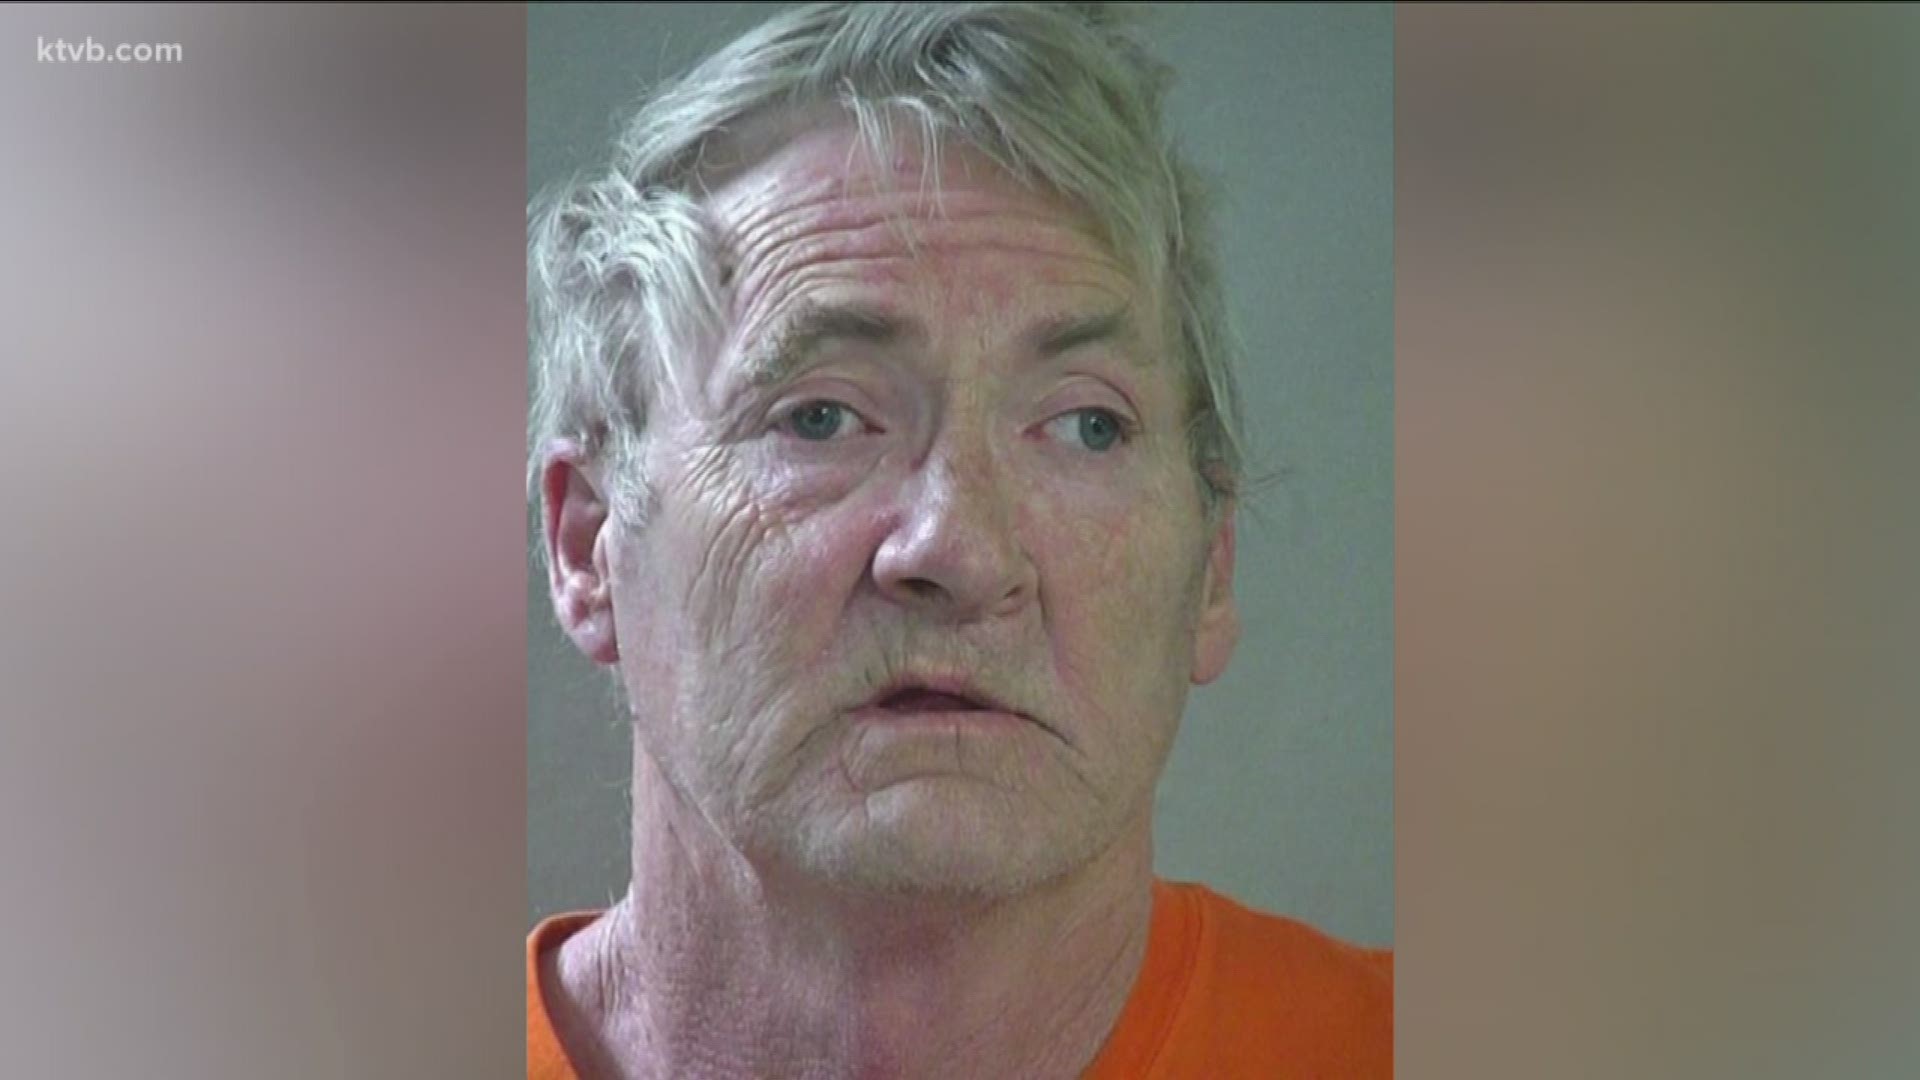 Mac Henderson has already pleaded guilty to sexually assaulting two children, but police fear they are not his only victims.